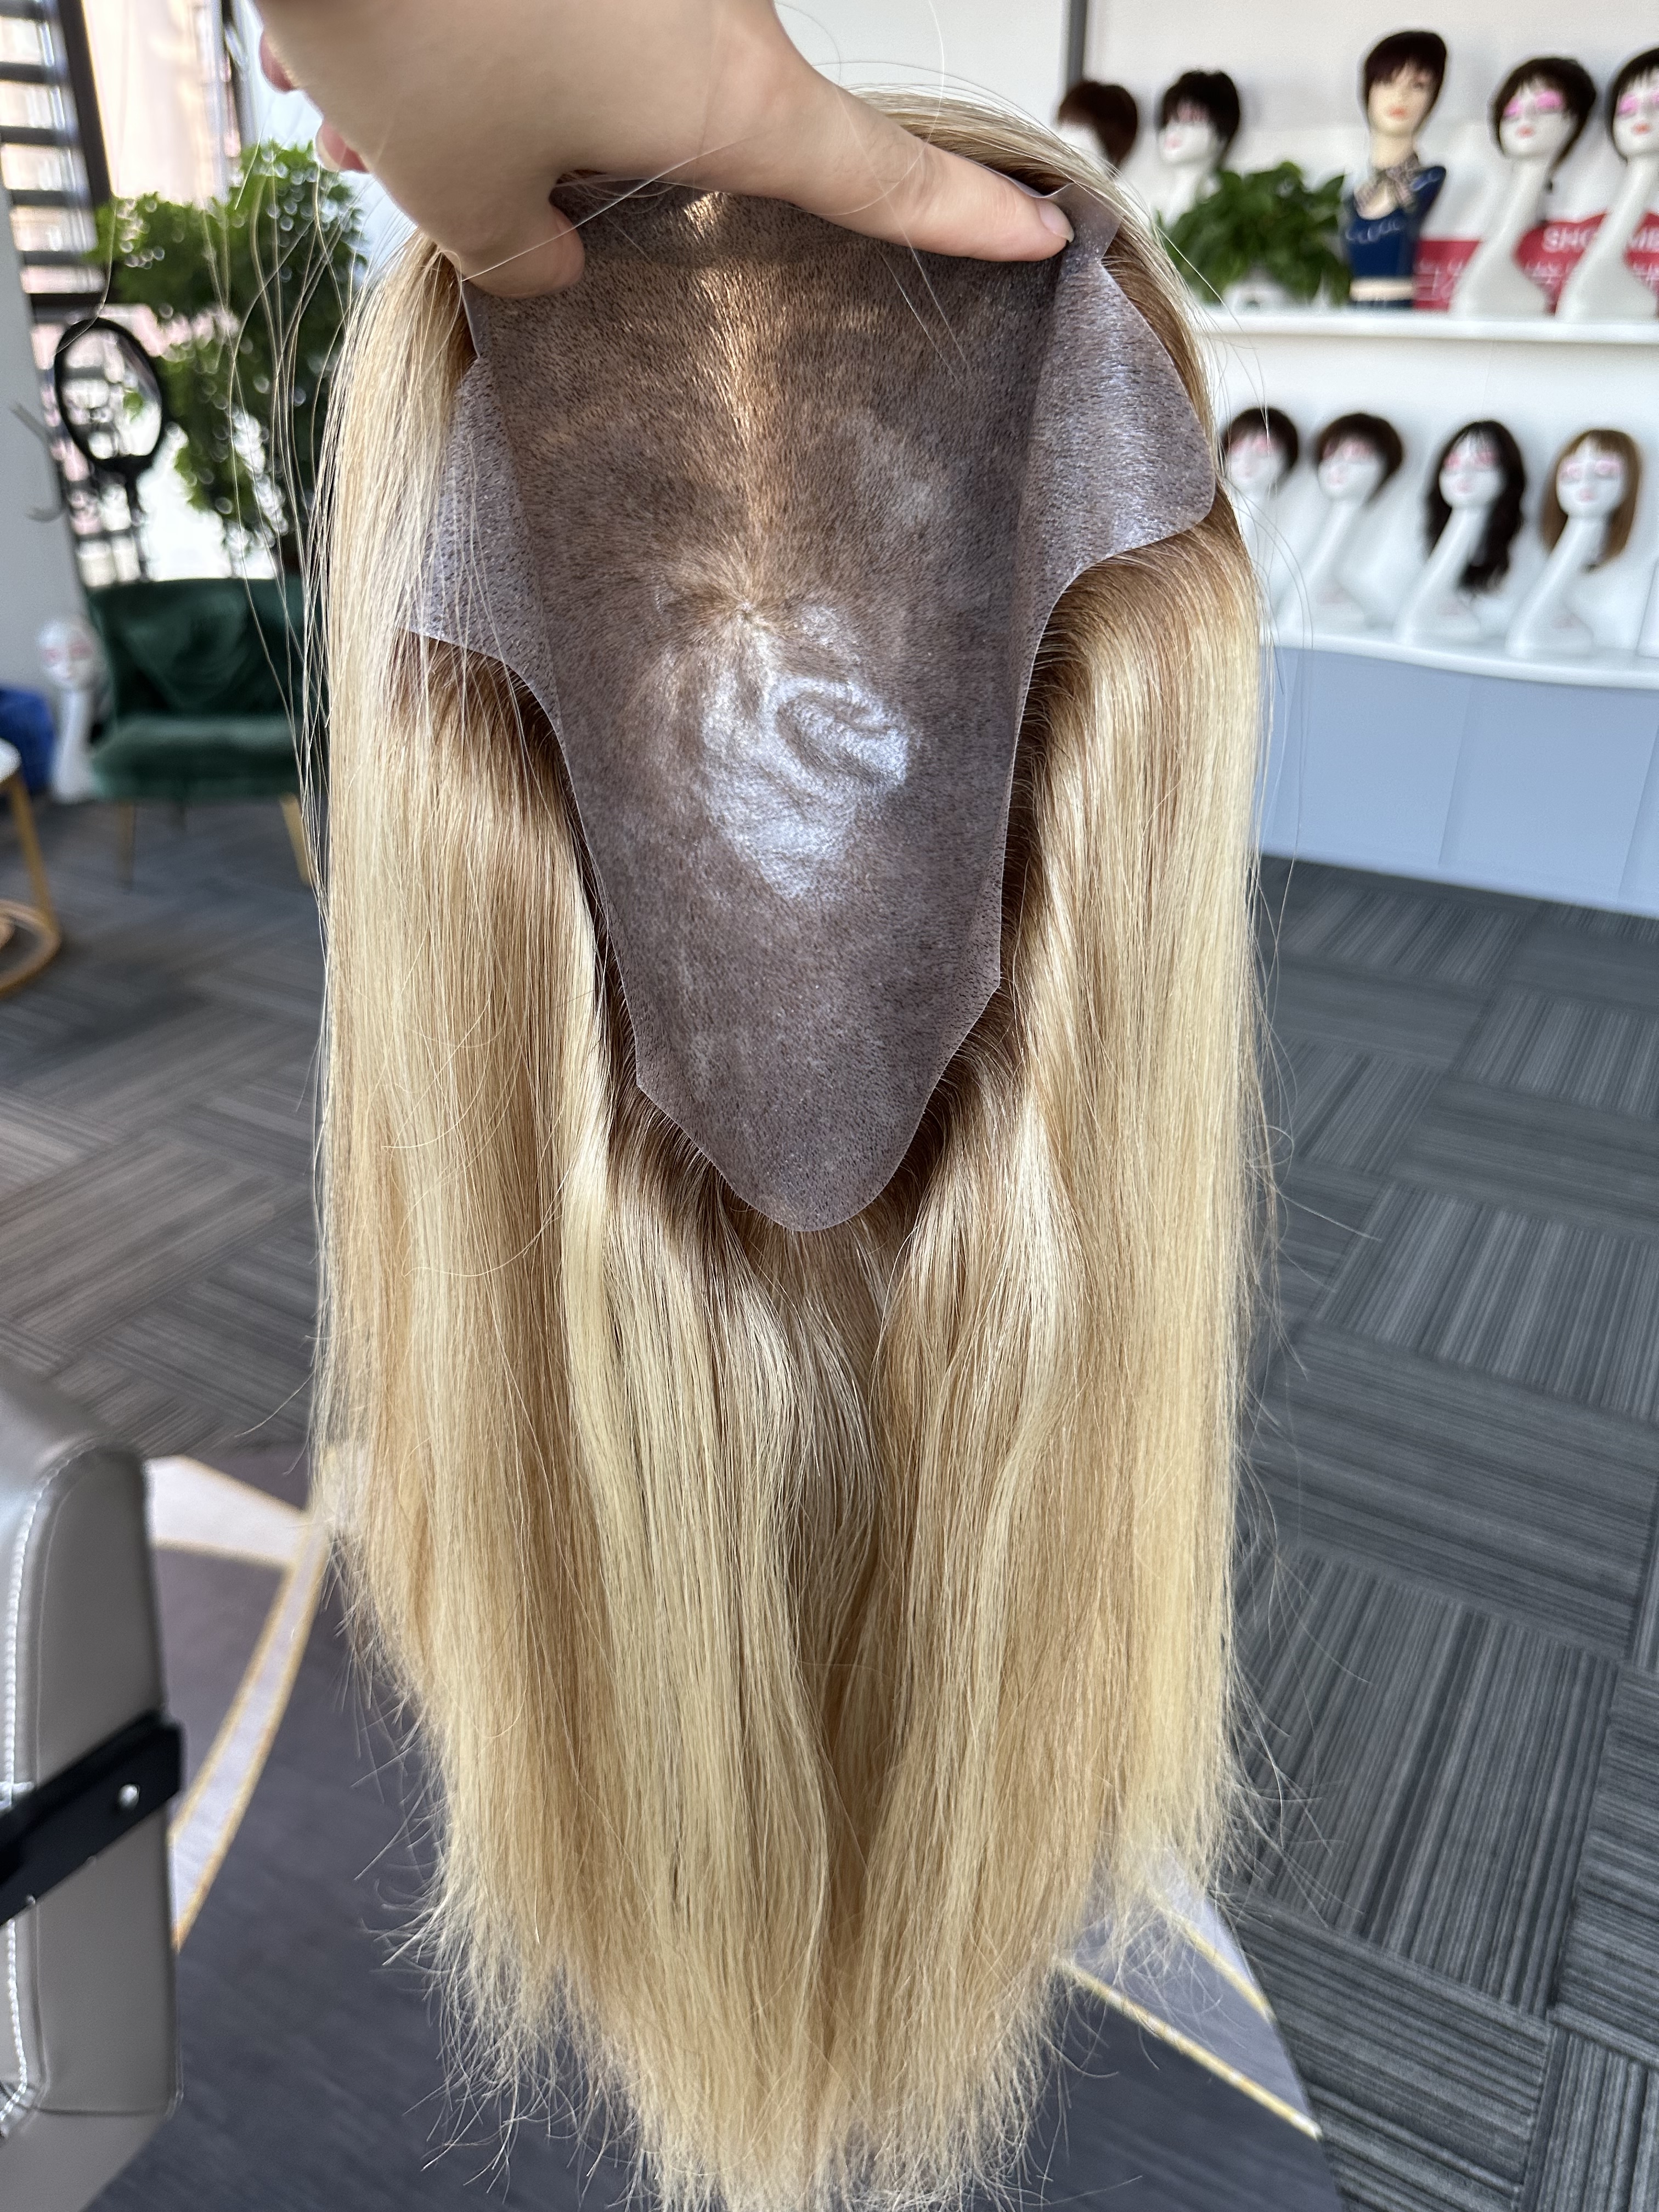 Dolago Best Injection Poly Skin Medical Wigs For Cancer Patients 130% Wholesale Real Virgin Human Hair Medical Wig For Women For Alopecia And Chemo Hair Loss